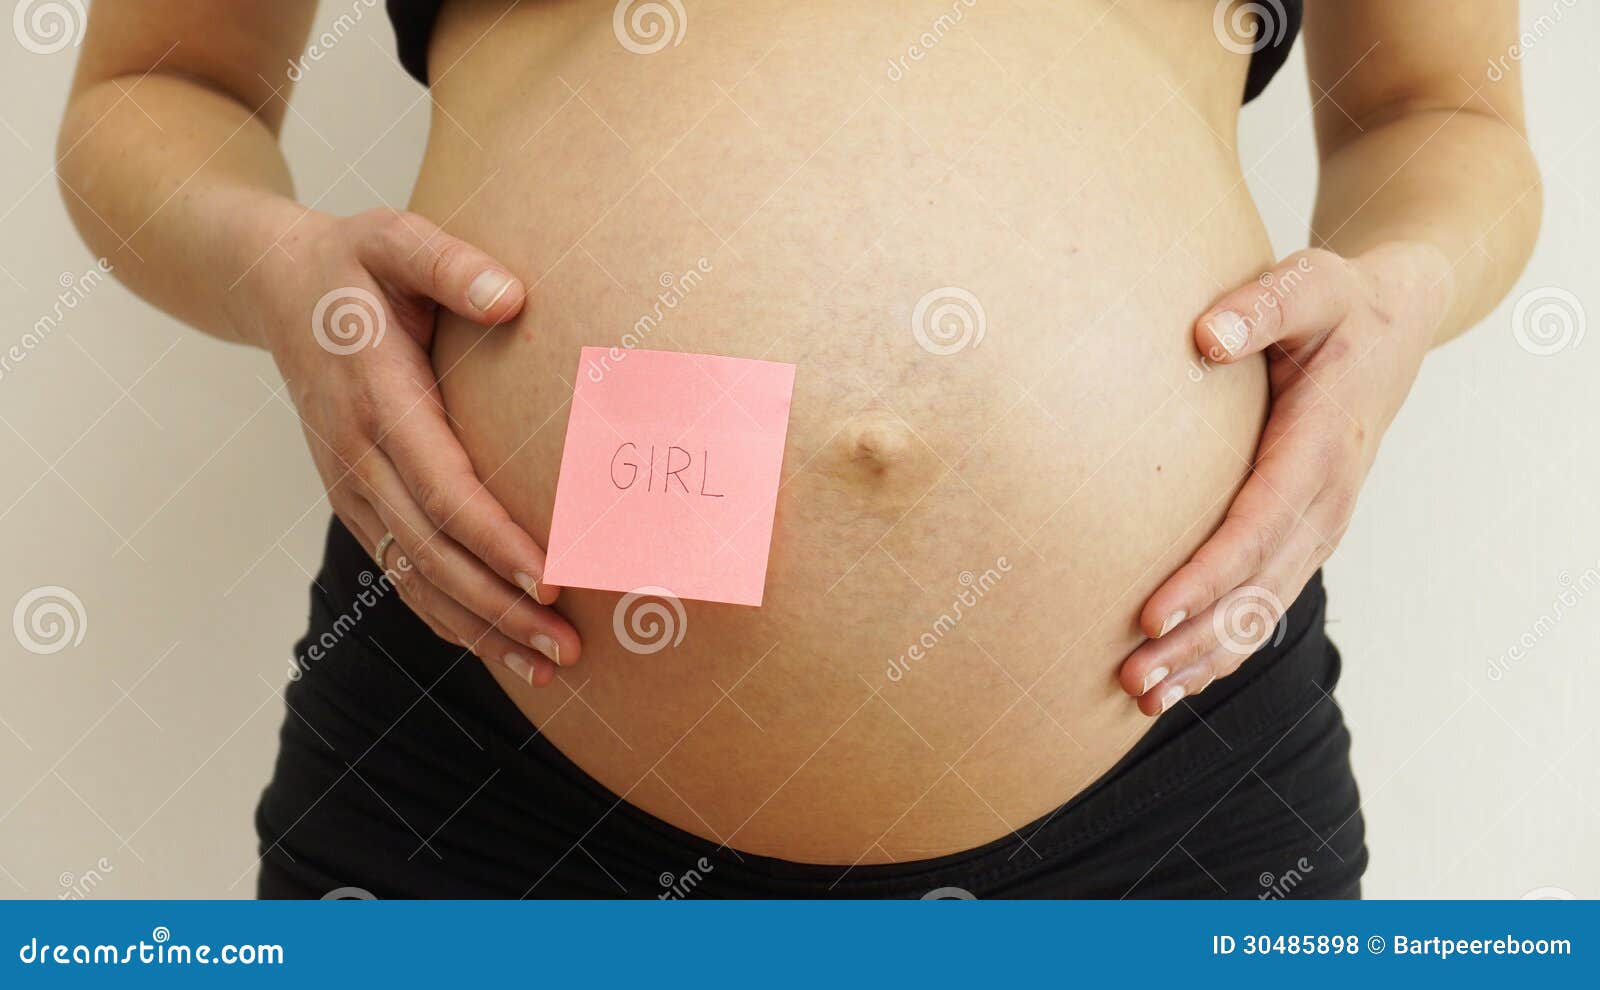 Pregnant Woman in Underwear with Stick Notes Stock Image - Image